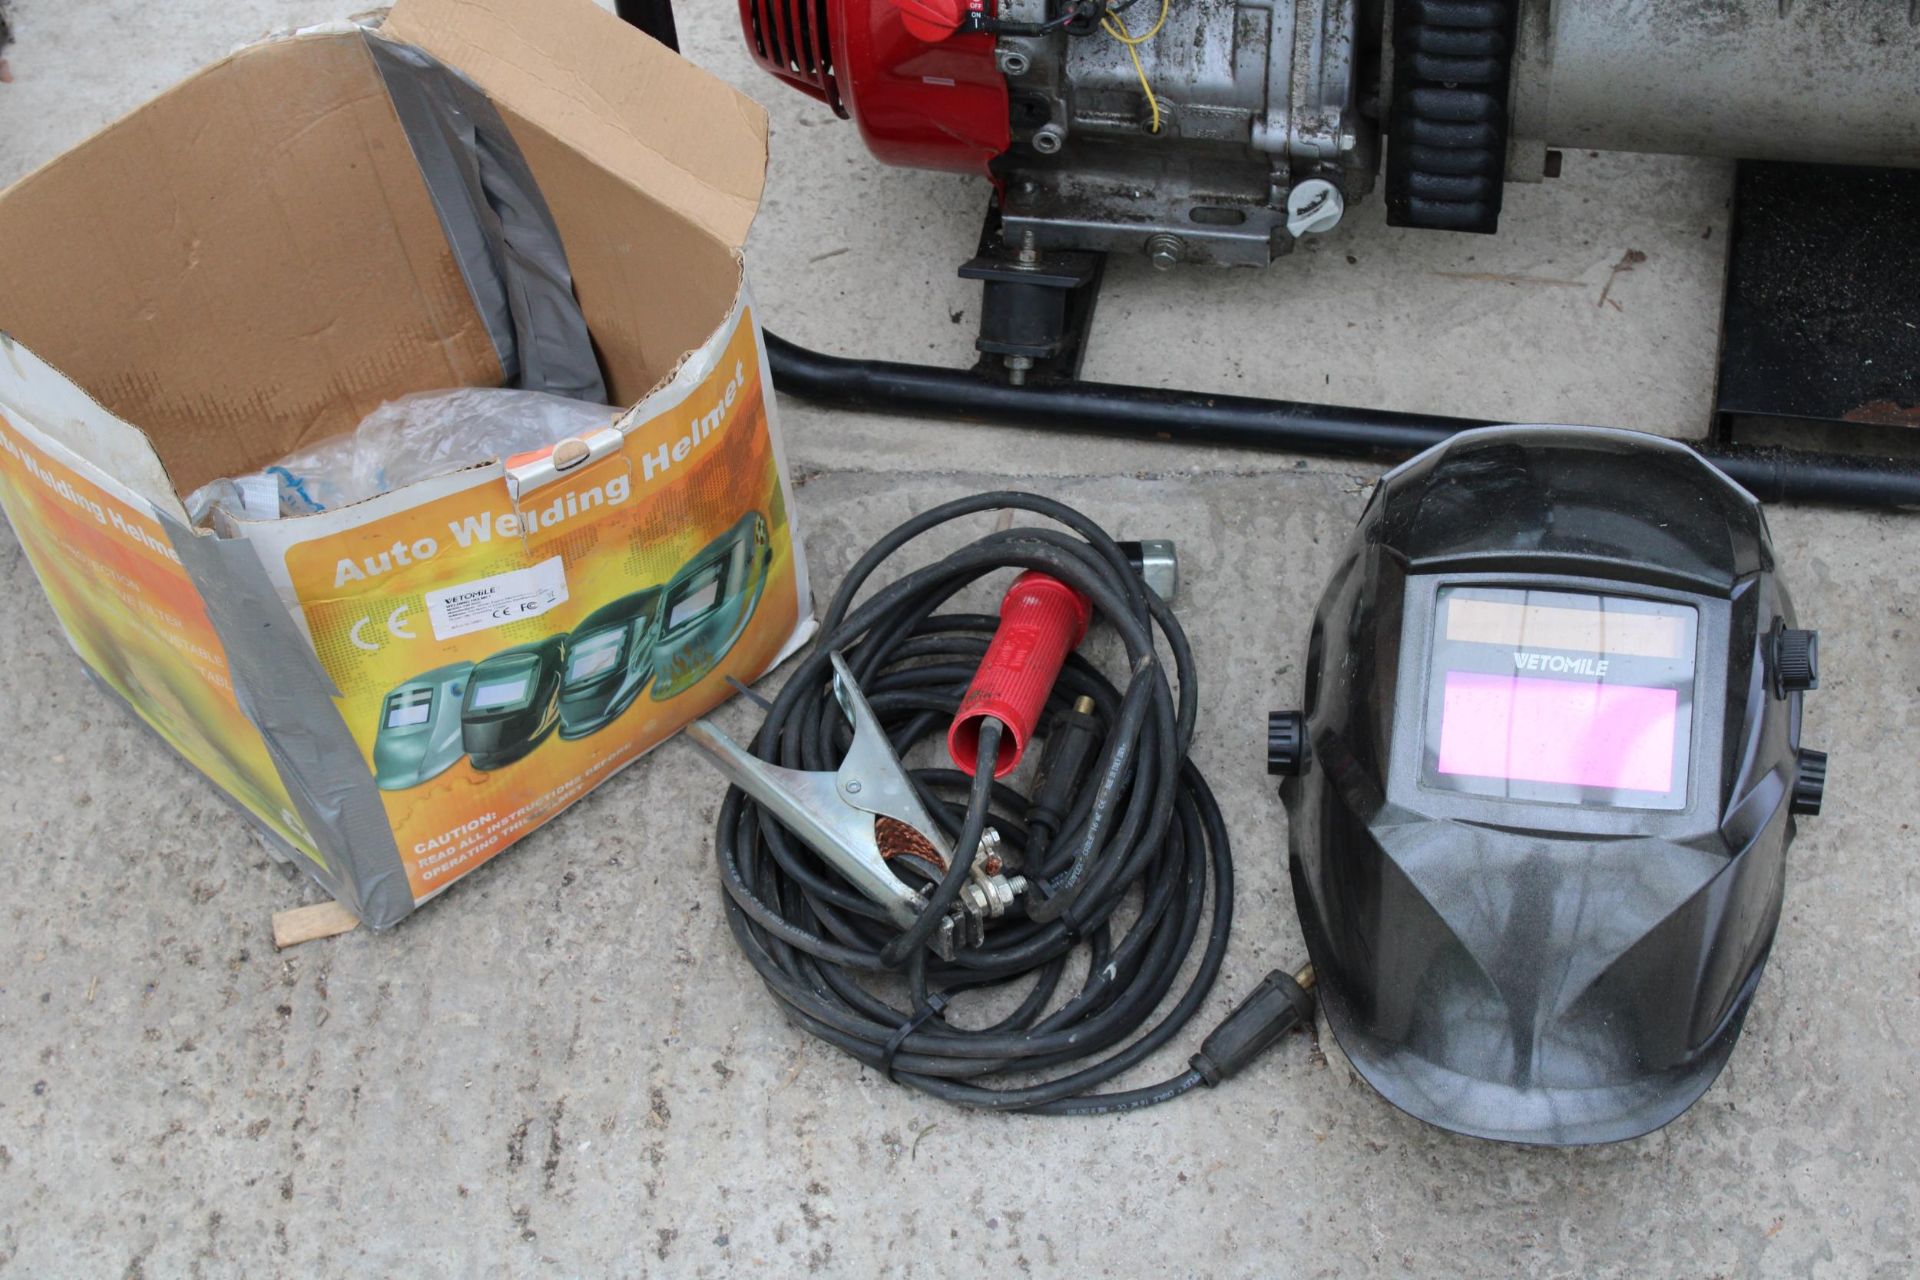 A HONDA WELDER GENERATOR, WITH MASKS, LEADS AND OWNERS WORKSHOP MANUAL - Image 2 of 4